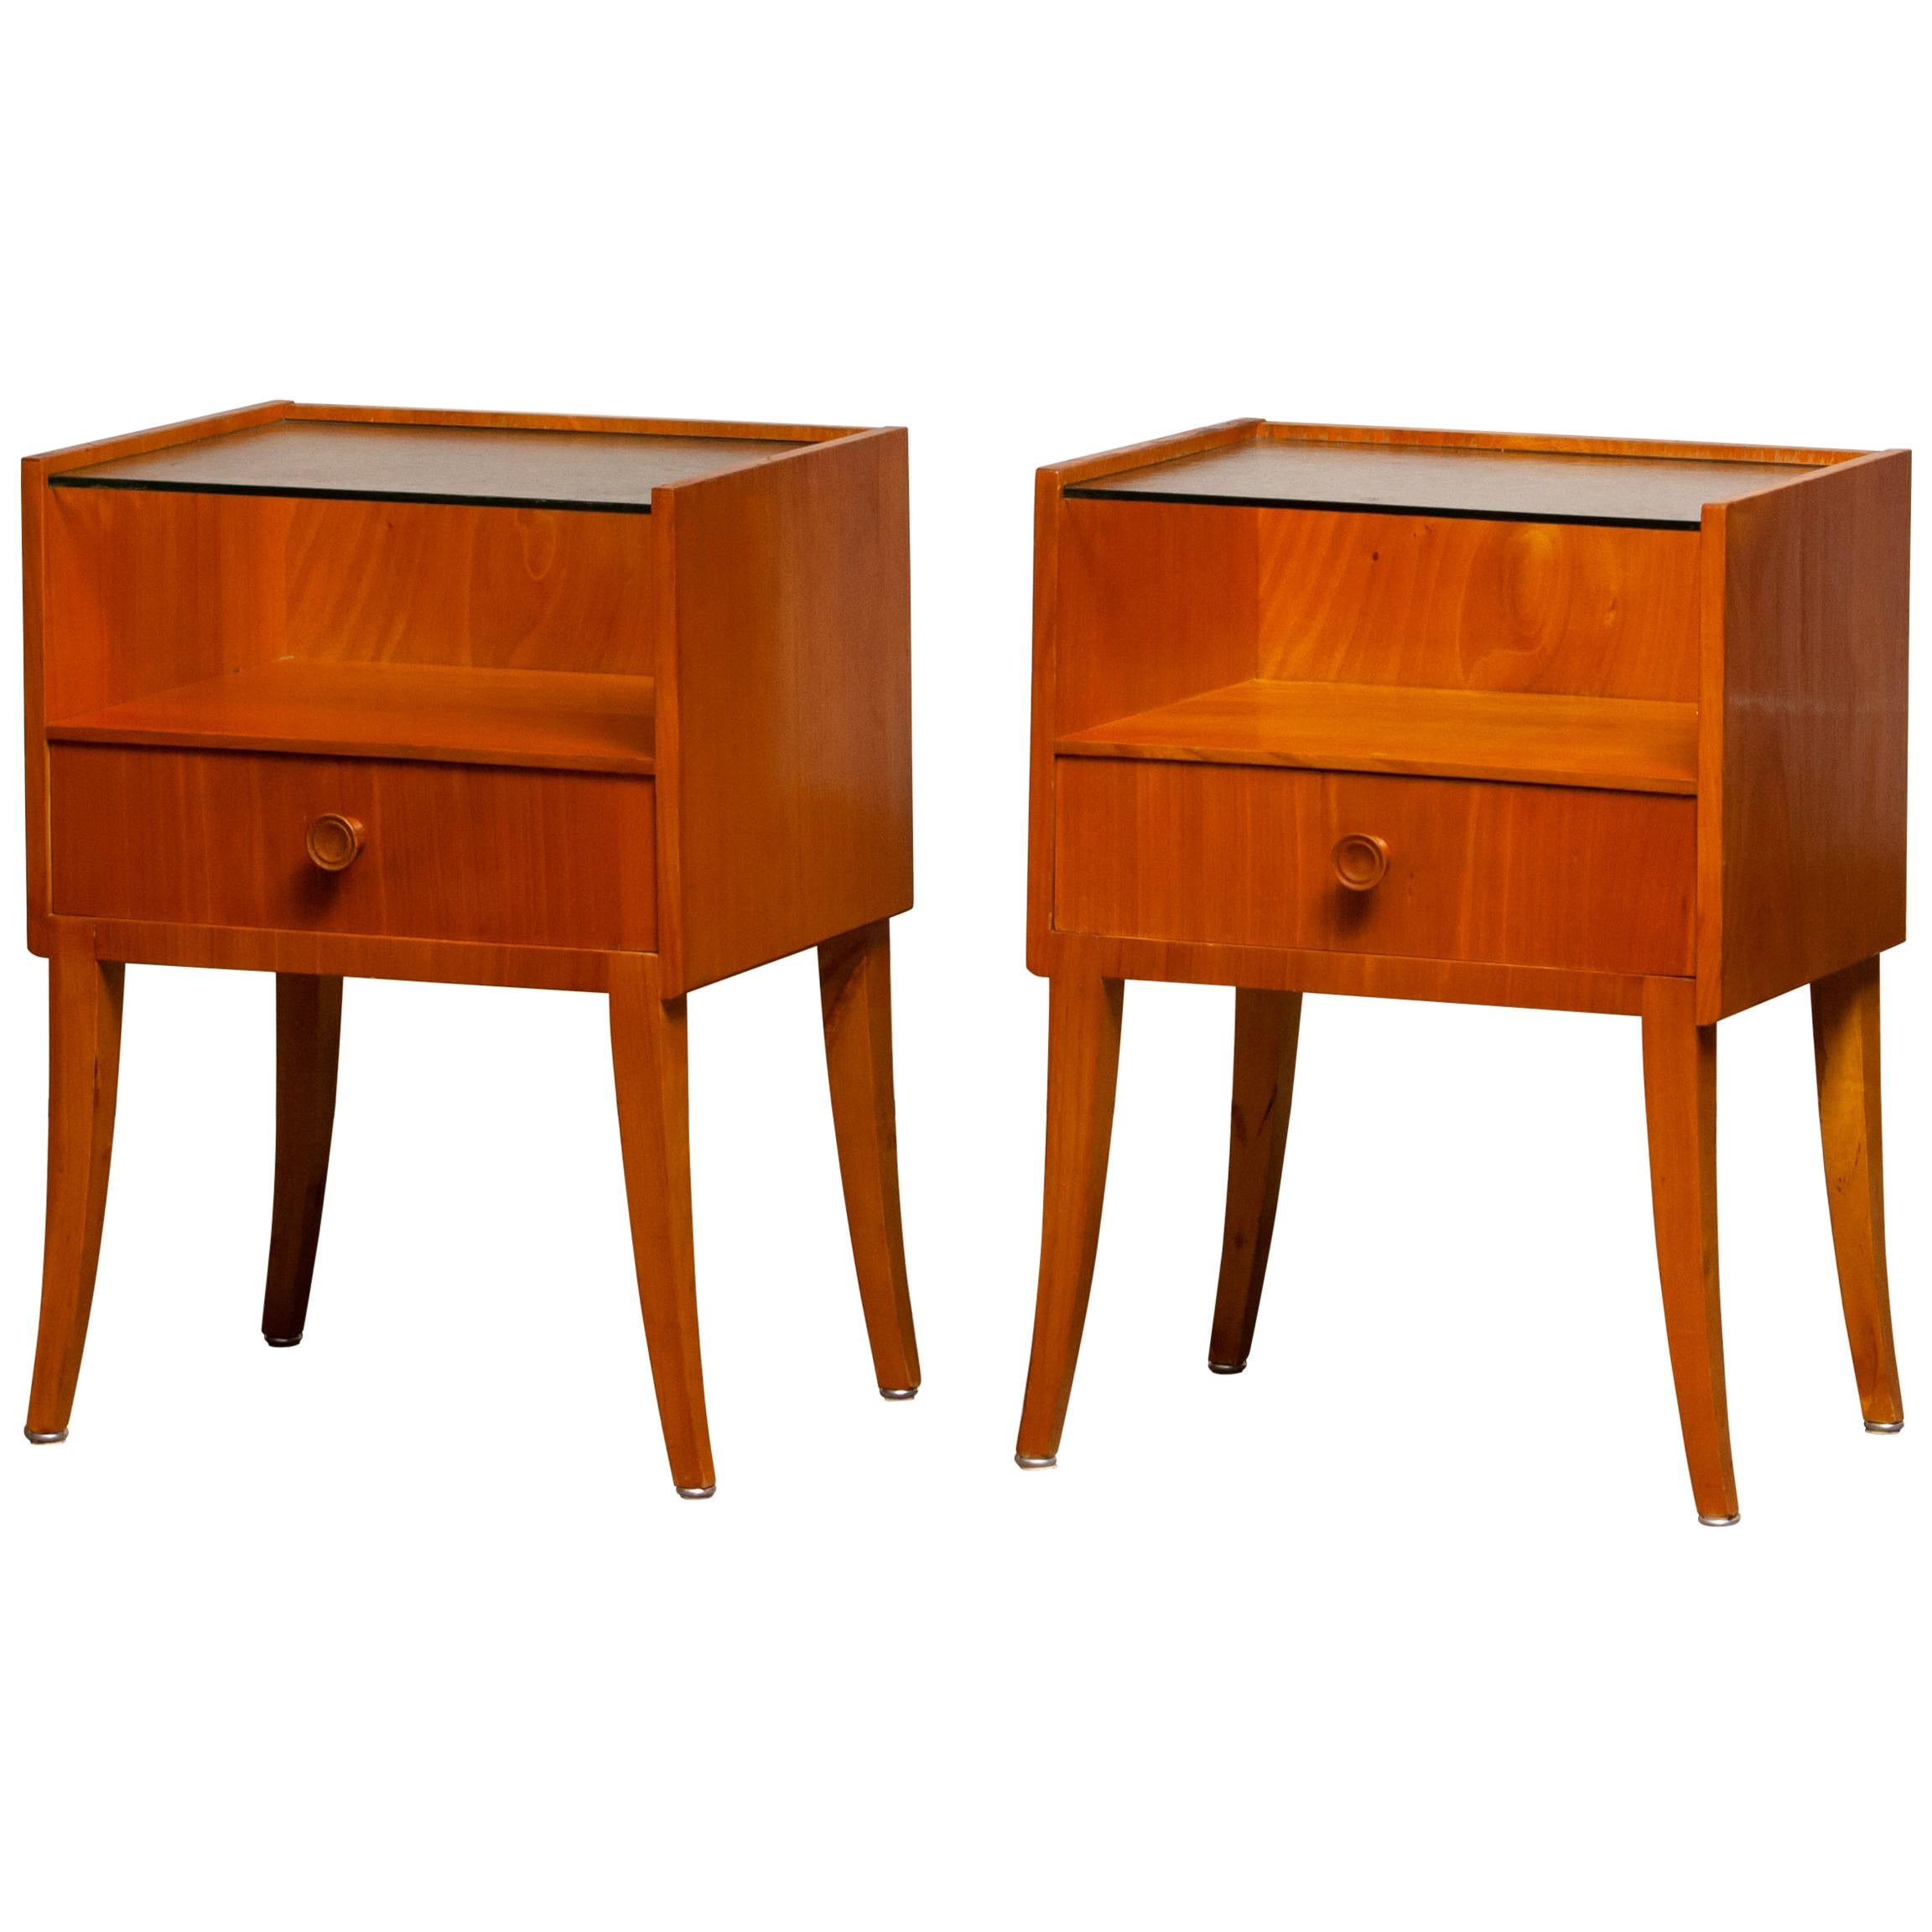 1950s Pair of Nightstands or Bedside Tables from Sweden in Elm with Glass Top